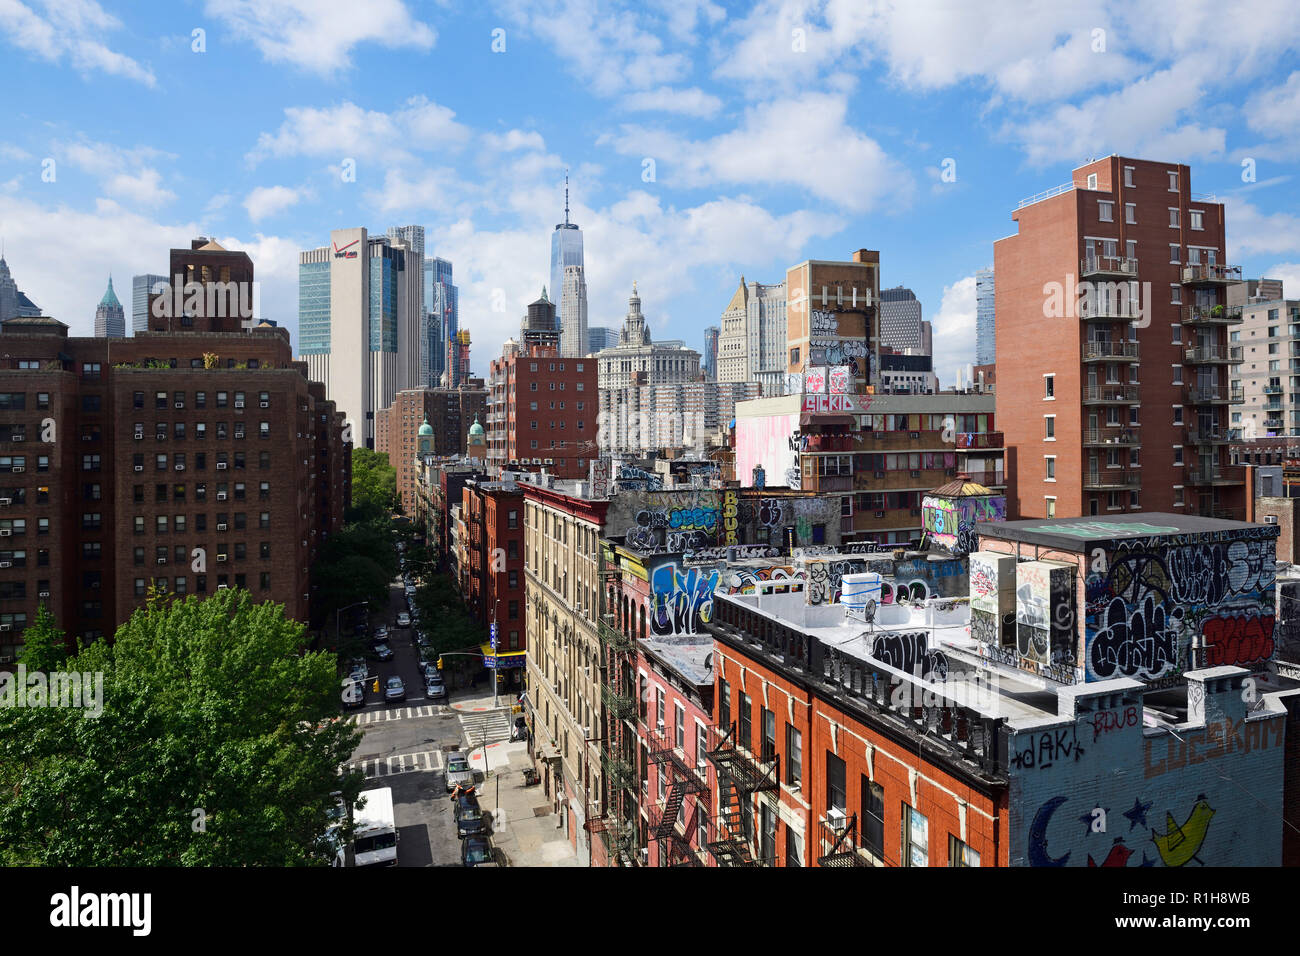 View from Manhattan Bridge to Madison Street, Chinatown and Graffities on the Roofs, New York City, USA Stock Photo